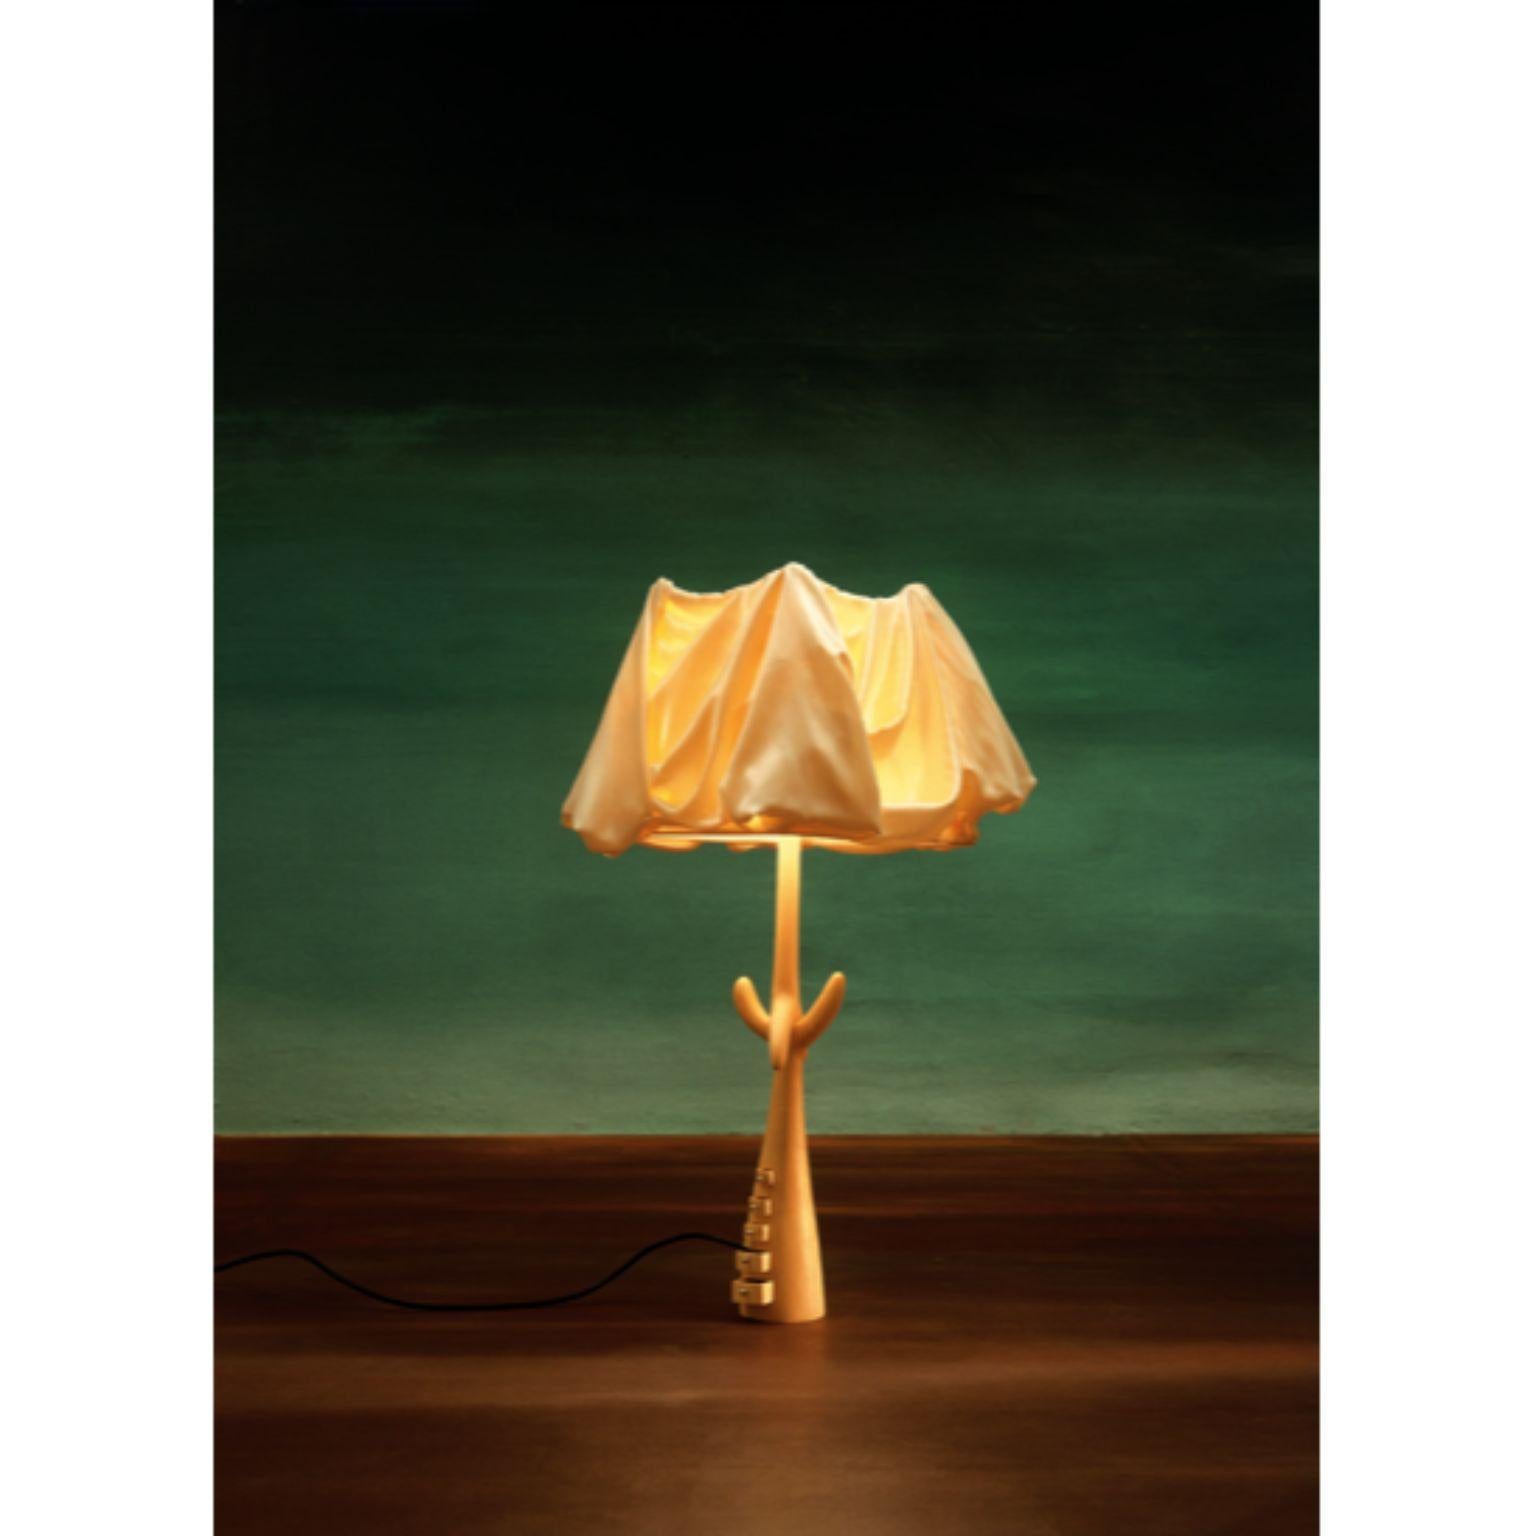 Muletas lamp, Salvador Dalí
Dimensions: 30 x 30 x 87 H cm
Materials: Carved structure in pale varnished lime-wood.
Lamp shade in beige linen.

The Bracelli lamp has a wooden board structure covered in fine gilding also available in a darker